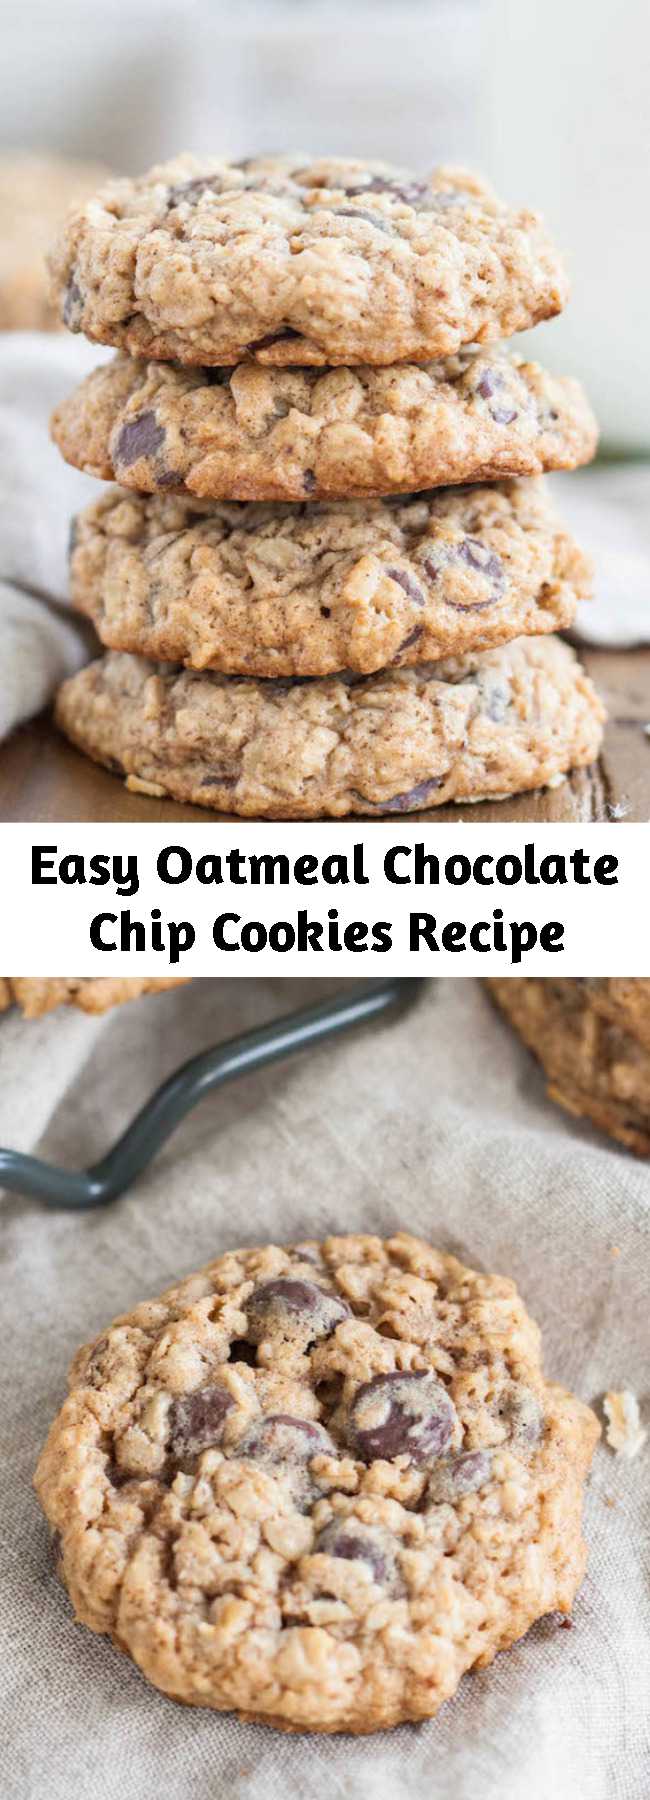 Easy Oatmeal Chocolate Chip Cookies Recipe – Mom Secret Ingrediets